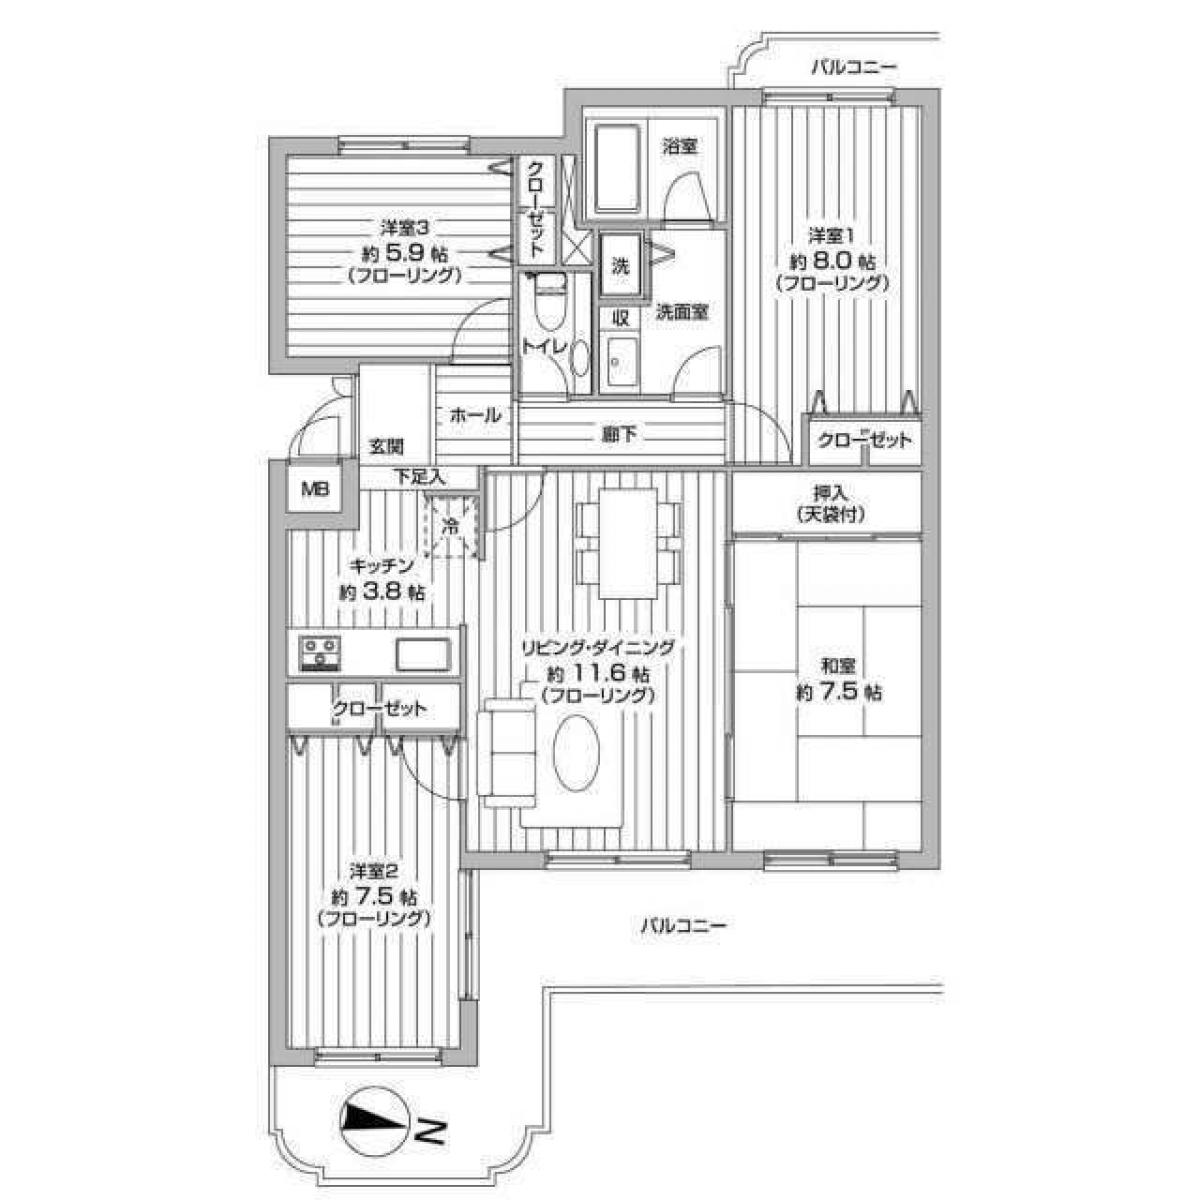 Picture of Apartment For Sale in Nara Shi, Nara, Japan